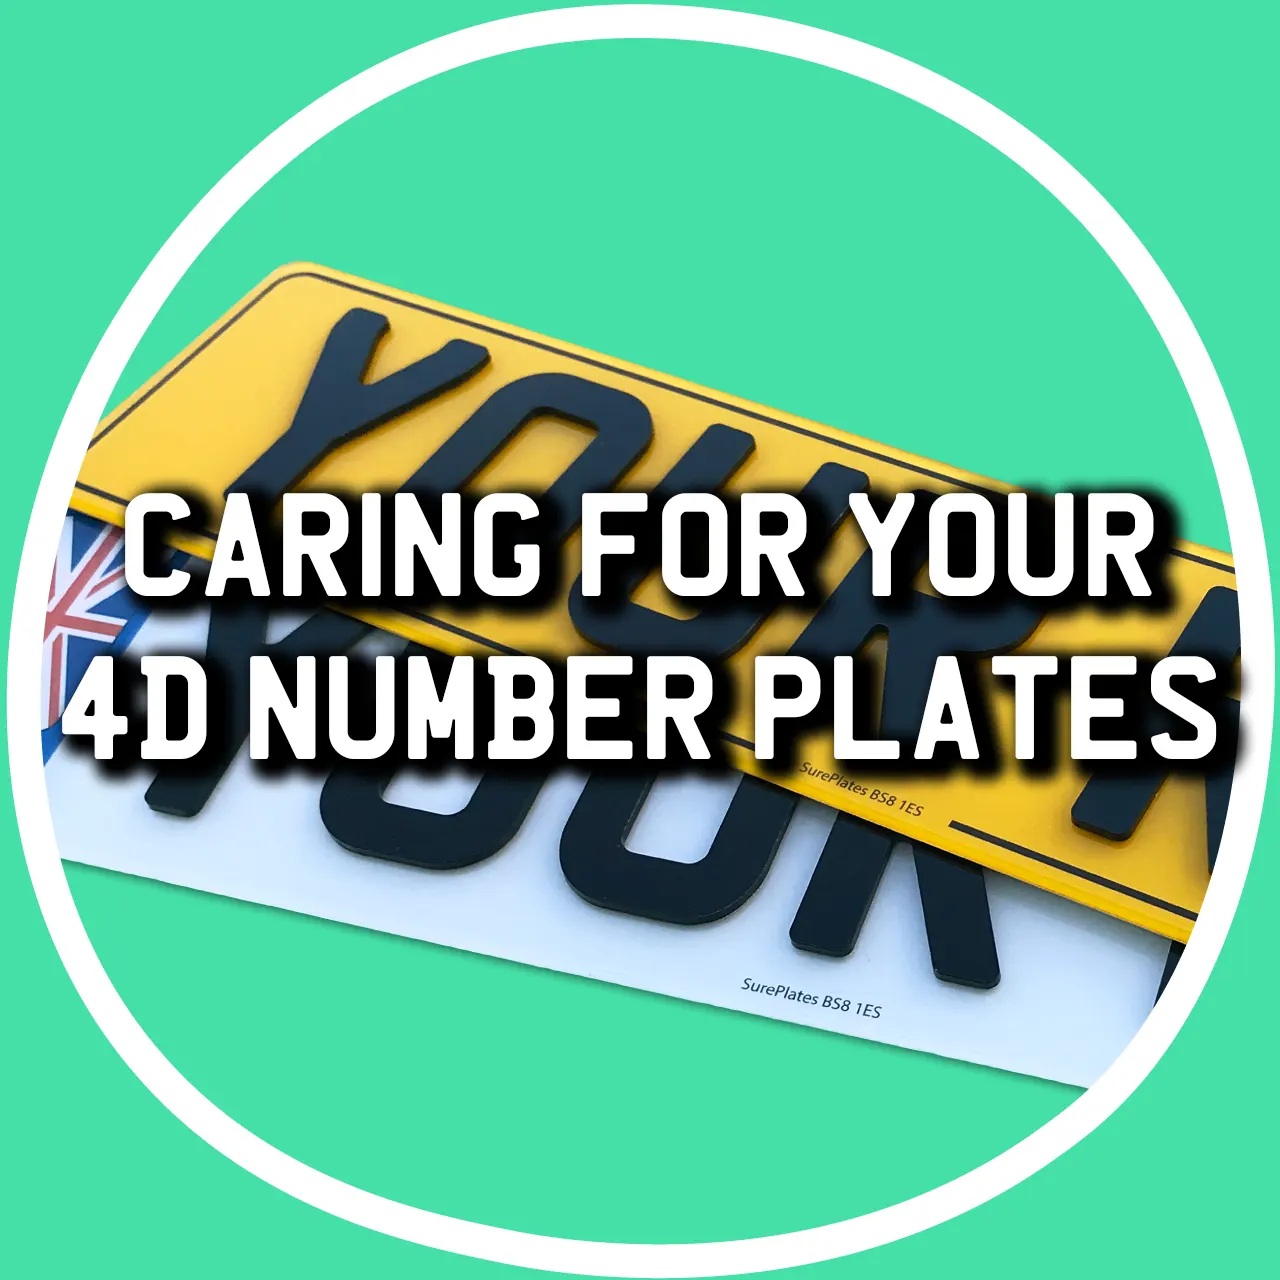 Caring For Your 4D Number Plates - SurePlates